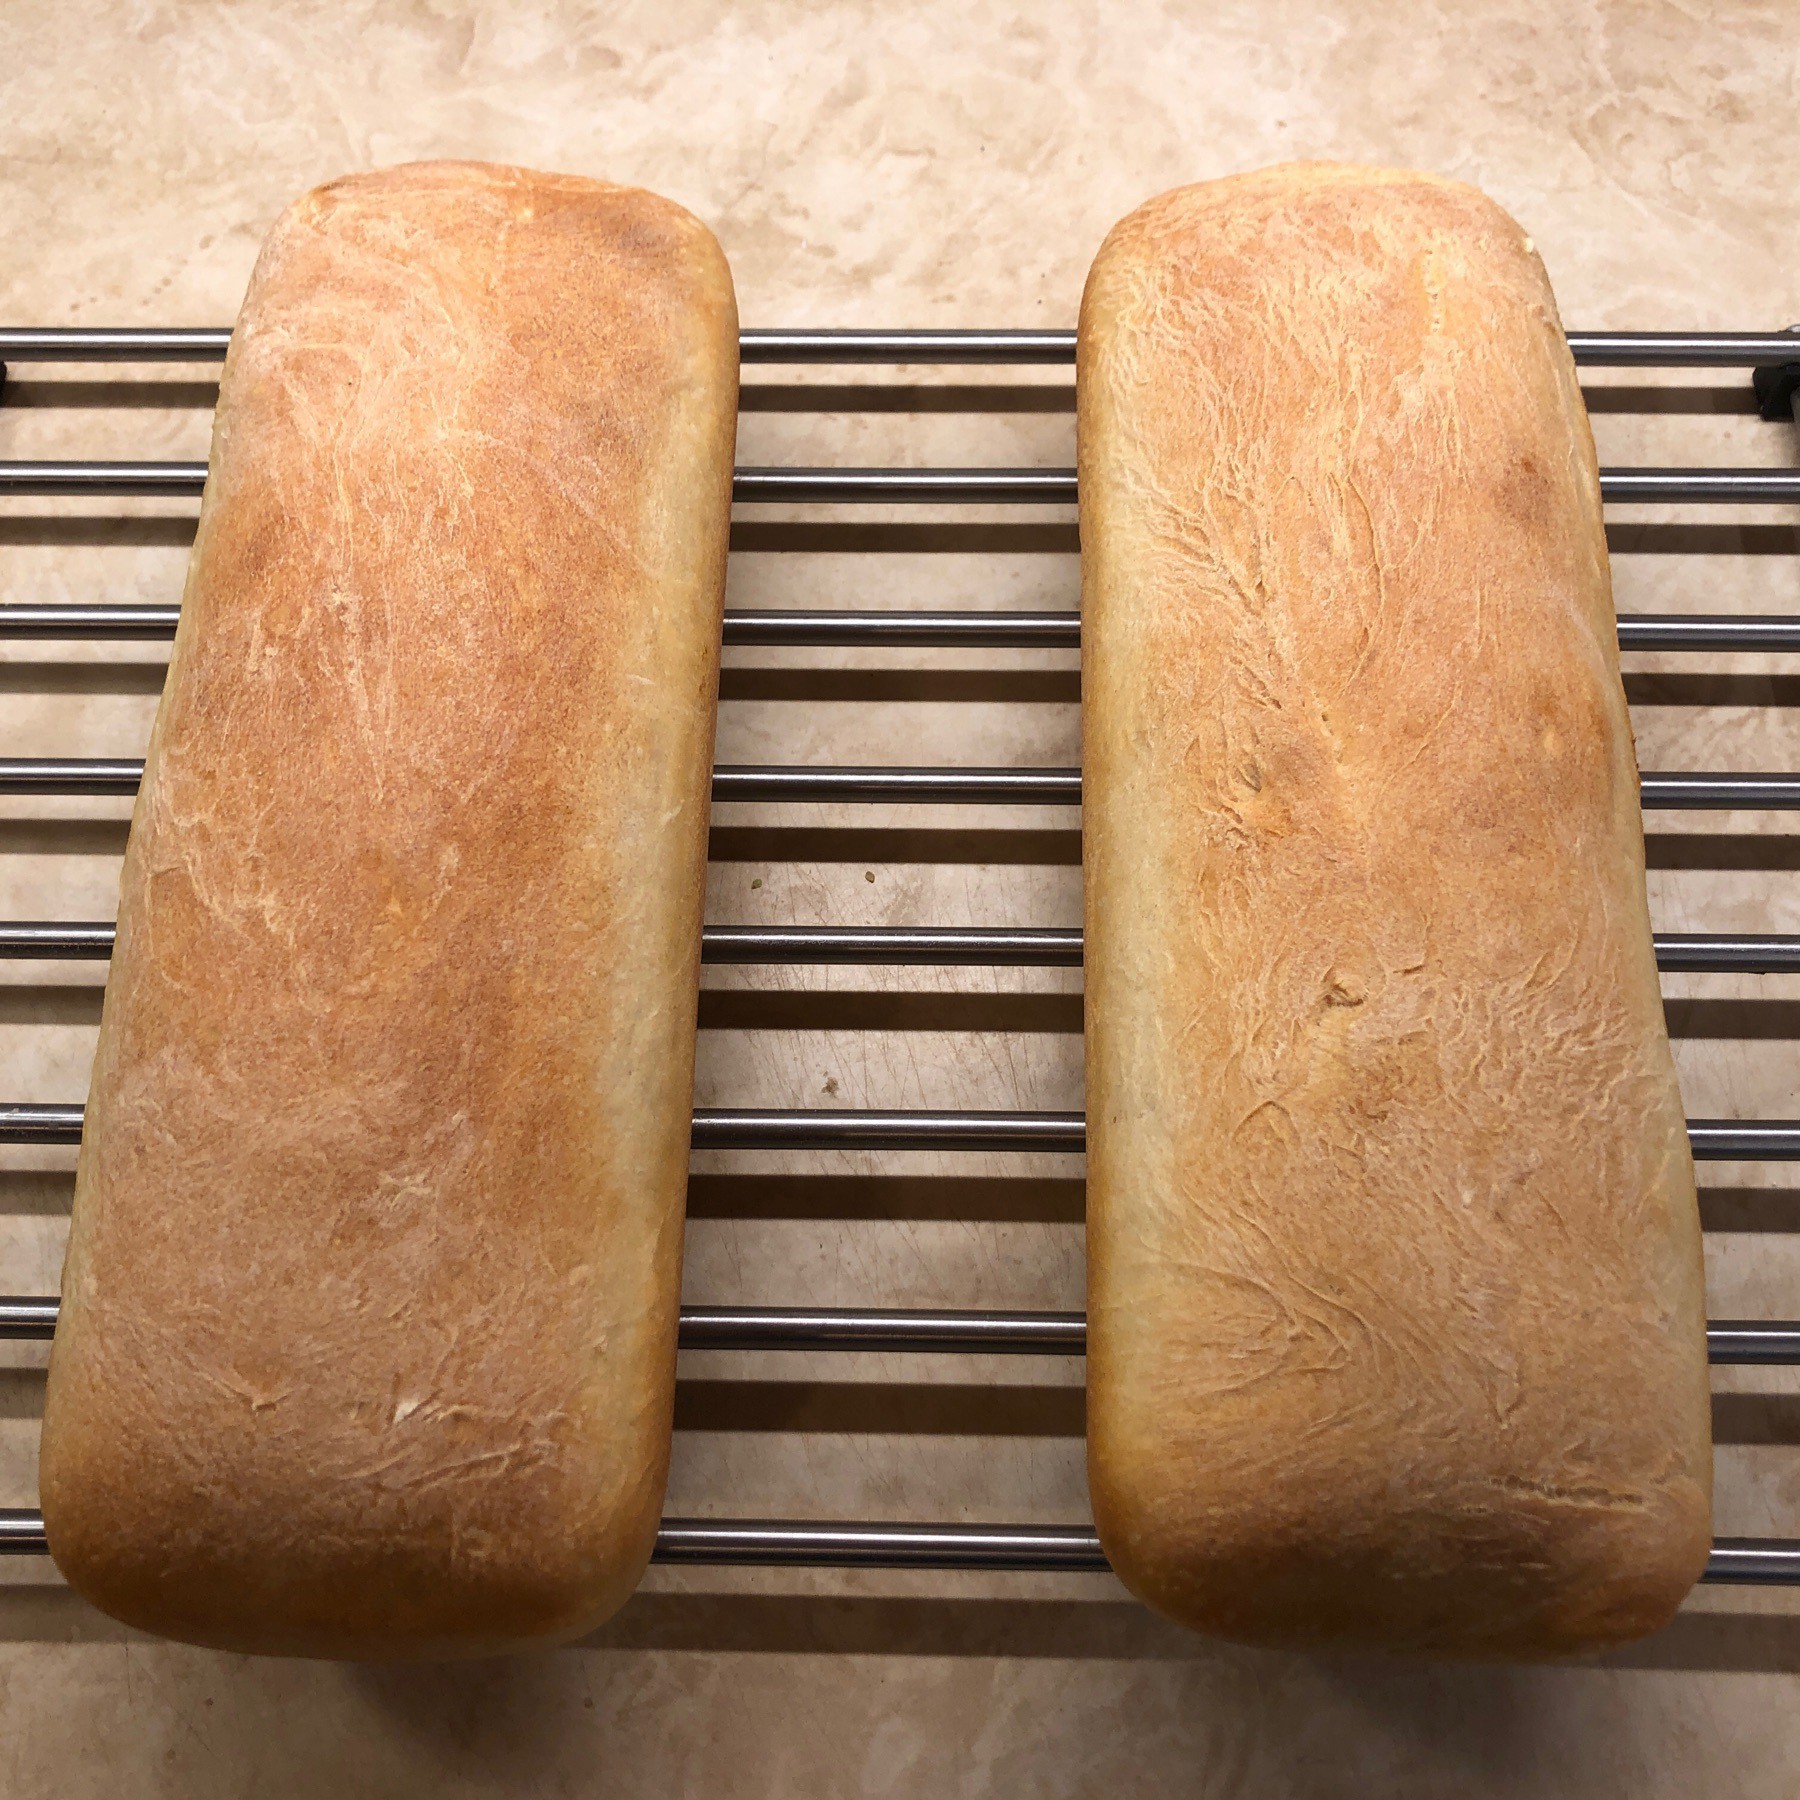 Two loaves of bread on cooling rack.